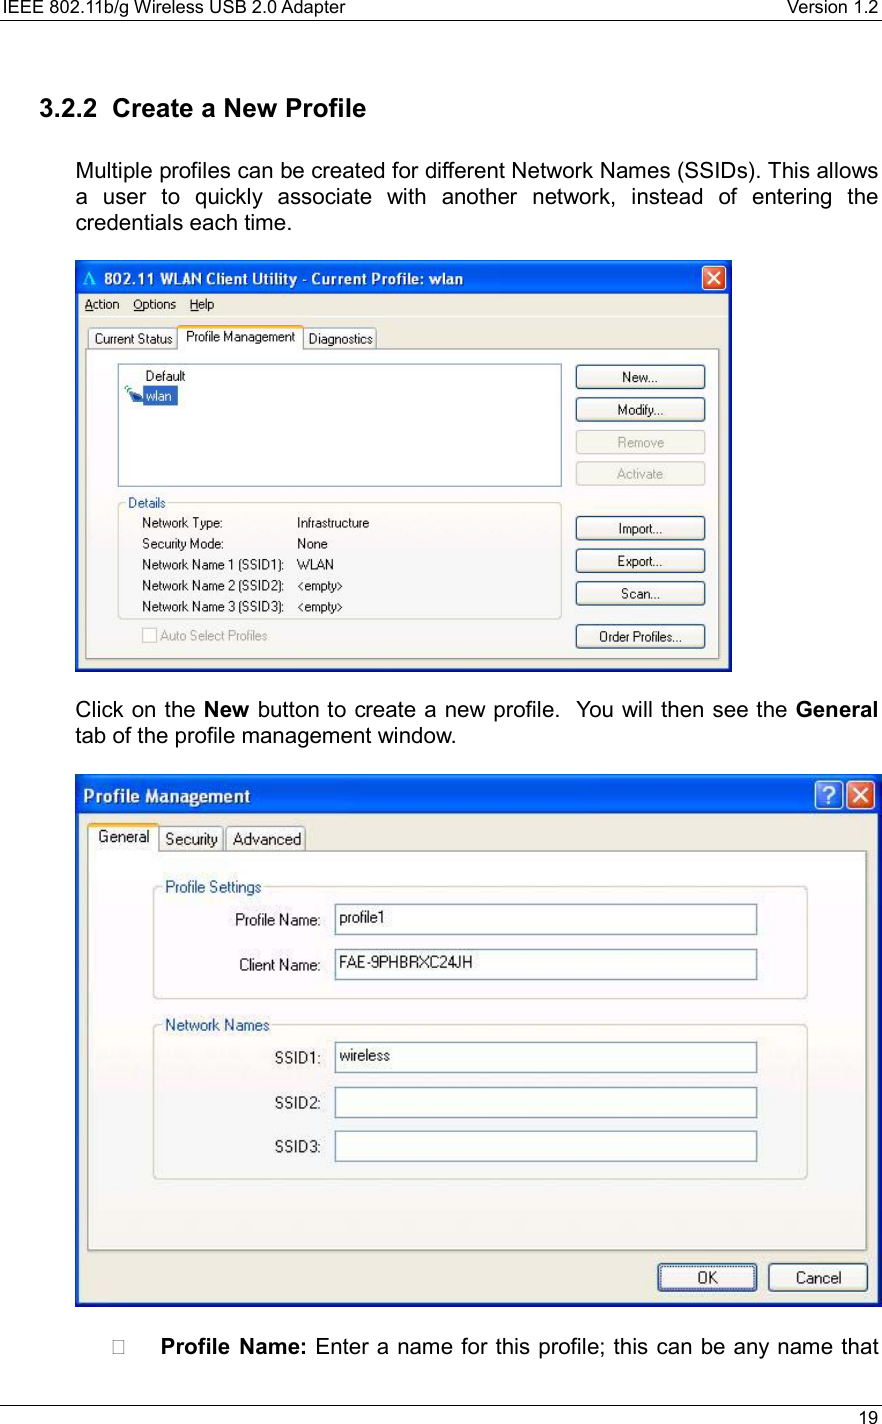 IEEE 802.11b/g Wireless USB 2.0 Adapter    Version 1.2   19  3.2.2  Create a New Profile   Multiple profiles can be created for different Network Names (SSIDs). This allows a user to quickly associate with another network, instead of entering the credentials each time.      Click on the New button to create a new profile.  You will then see the General tab of the profile management window.        Profile Name: Enter a name for this profile; this can be any name that 